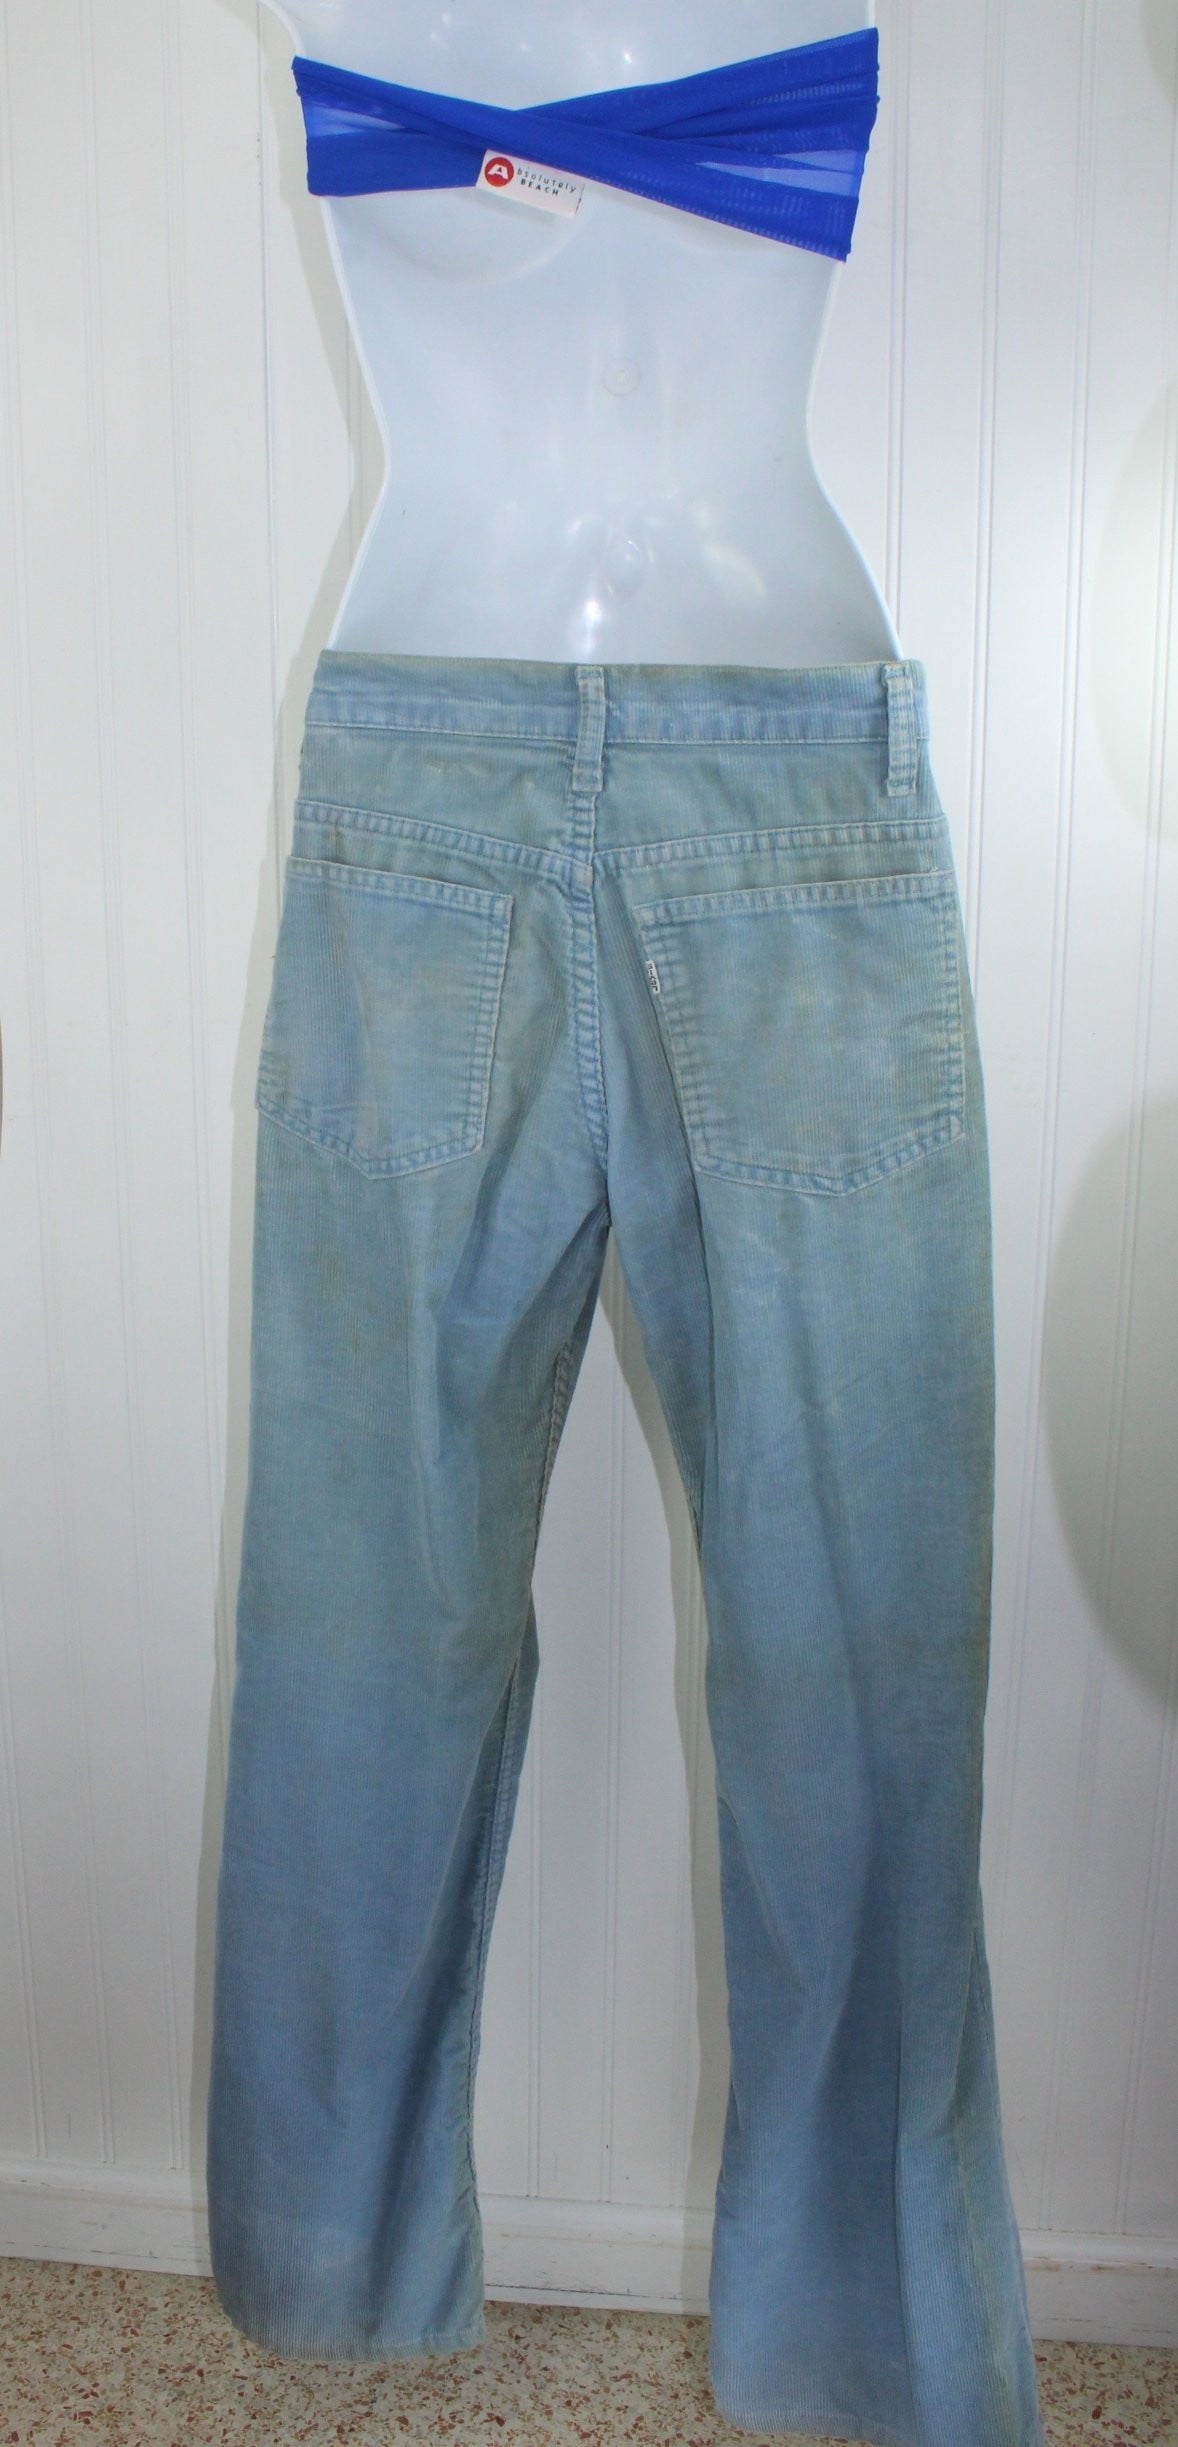 Vintage Levi's Skate Boarder Distressed Blue Cord Jeans 517 - Early 1990s - White Tab all gender